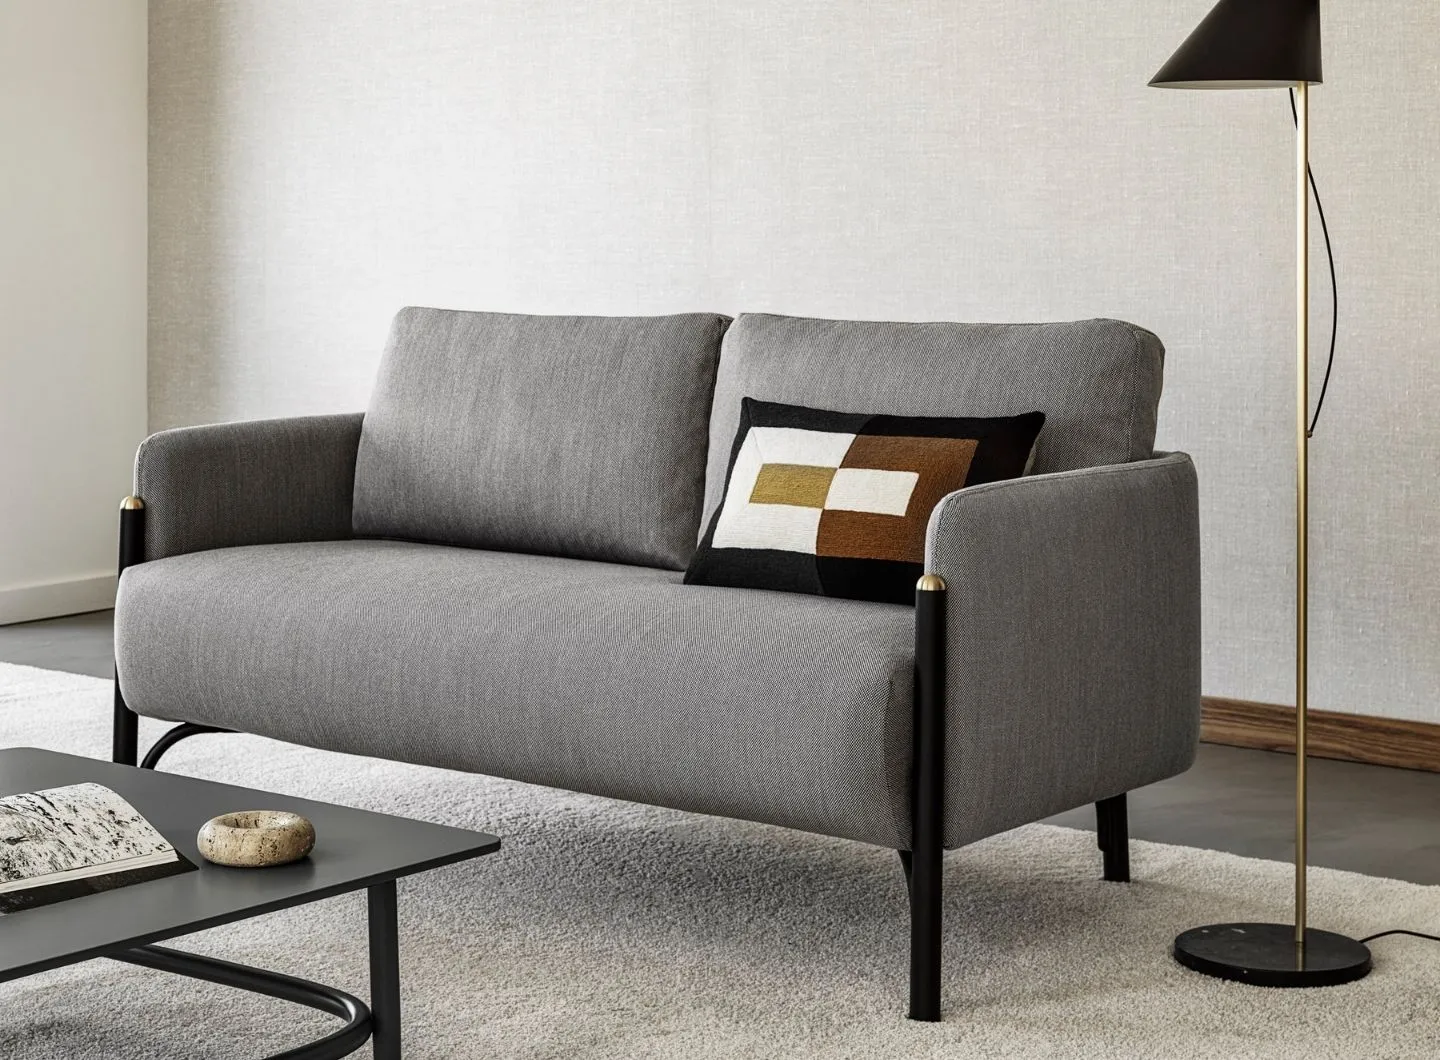 Jannis two seater sofa